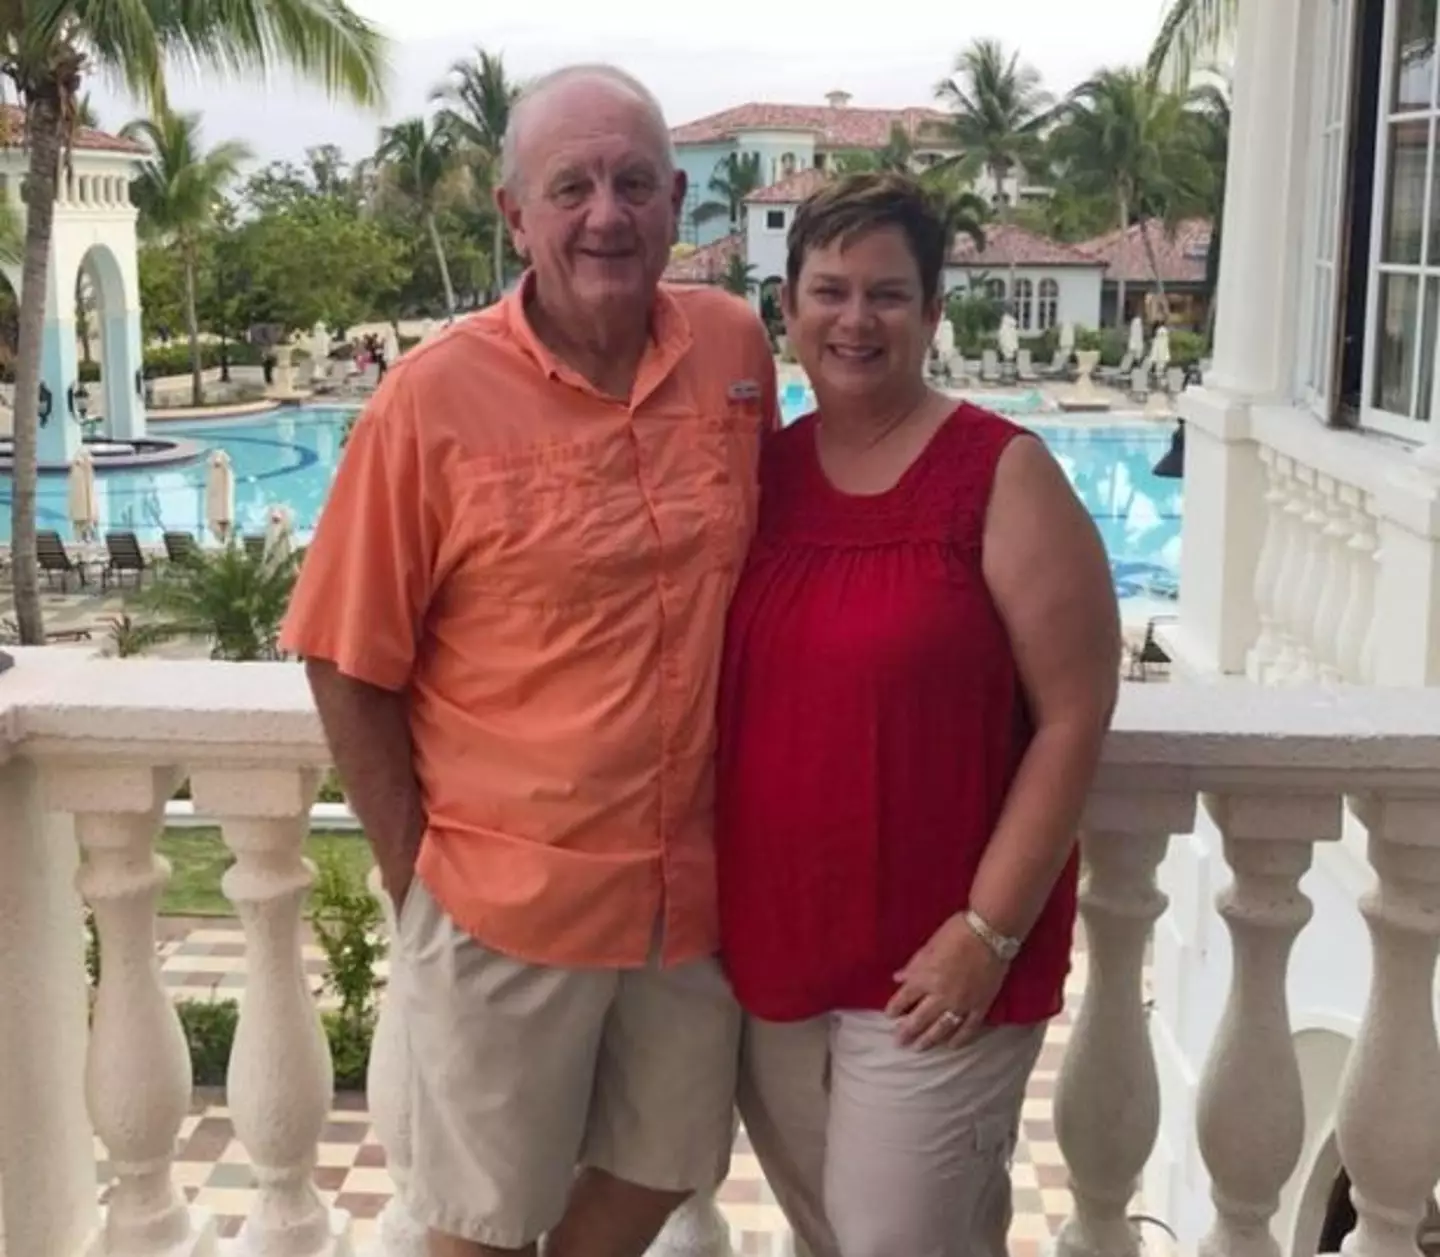 Robbie and Michael Phillips sadly lost their lives at the resort.